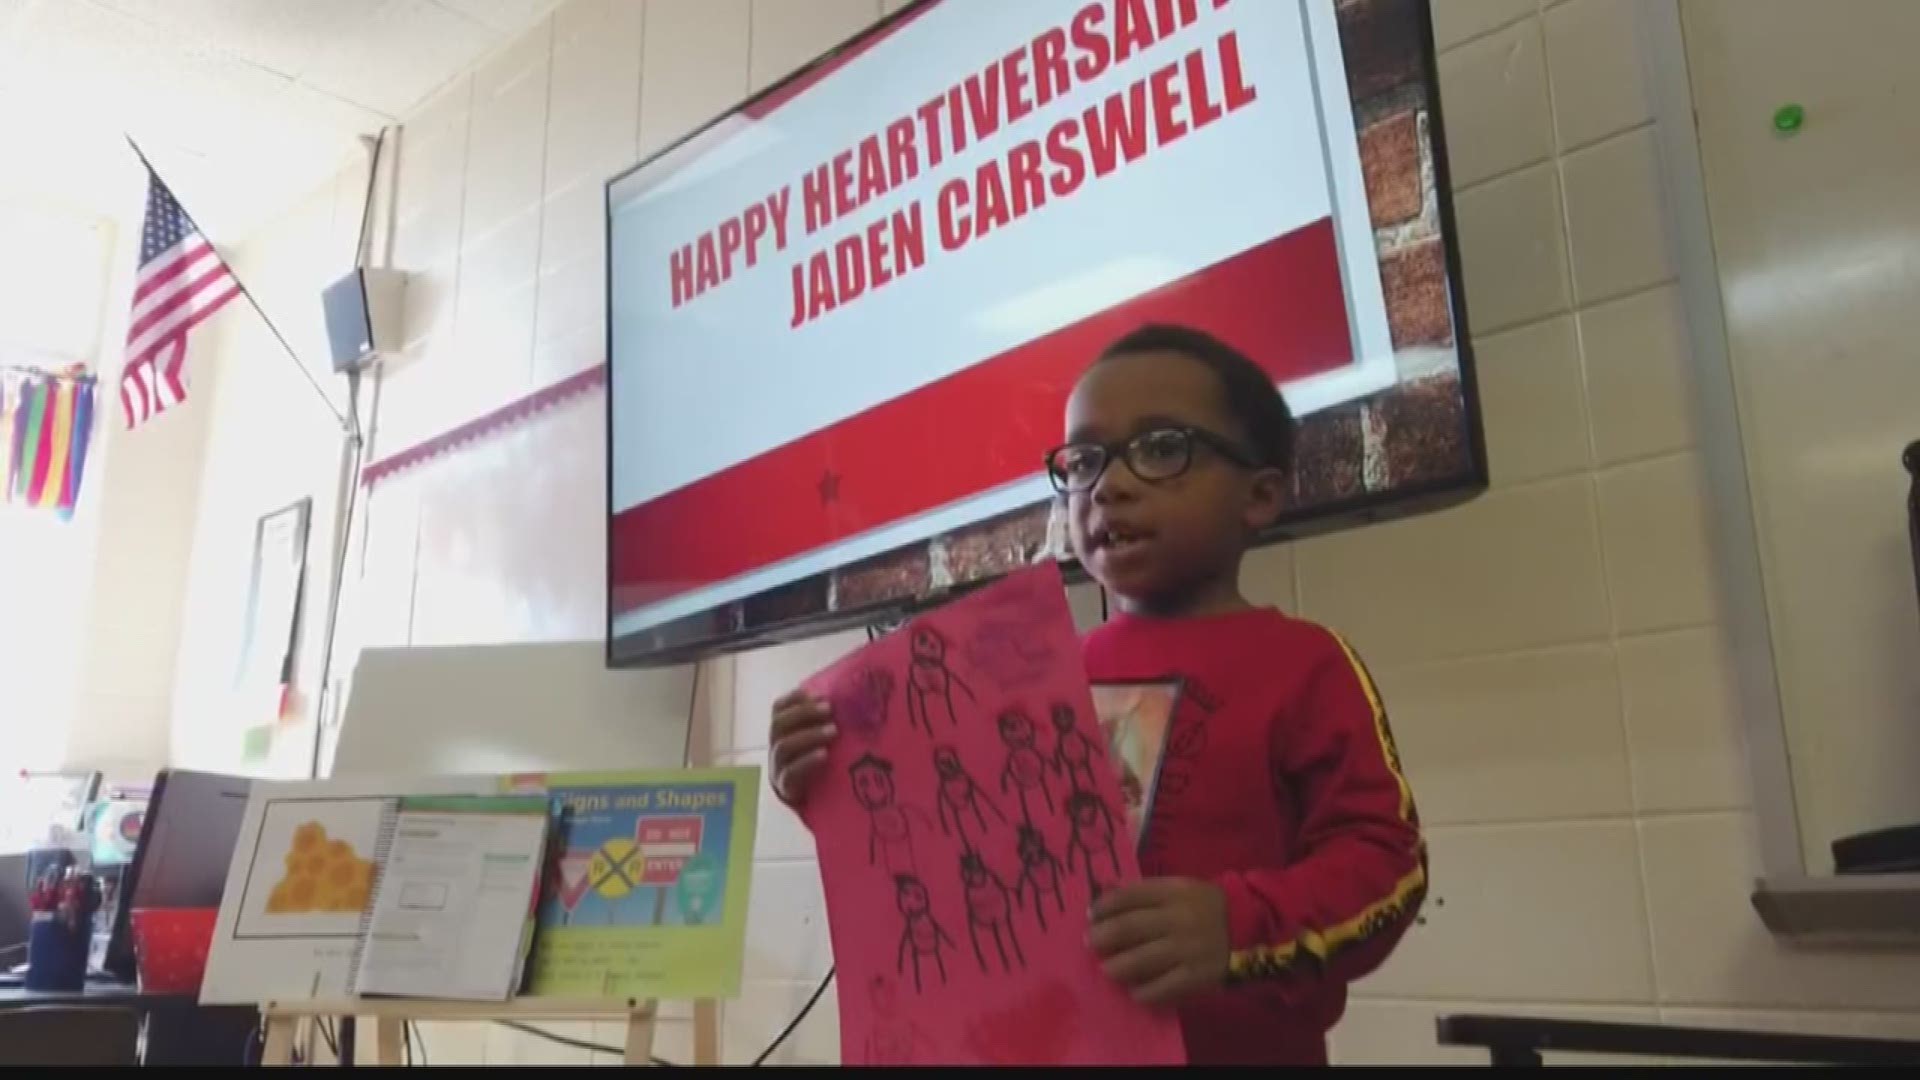 Jaden Carswell underwent a heart transplant at age 3. Now 6 years old, his teachers, family, and classmates threw him a surprise party for his 4th 'Heartiversary.'